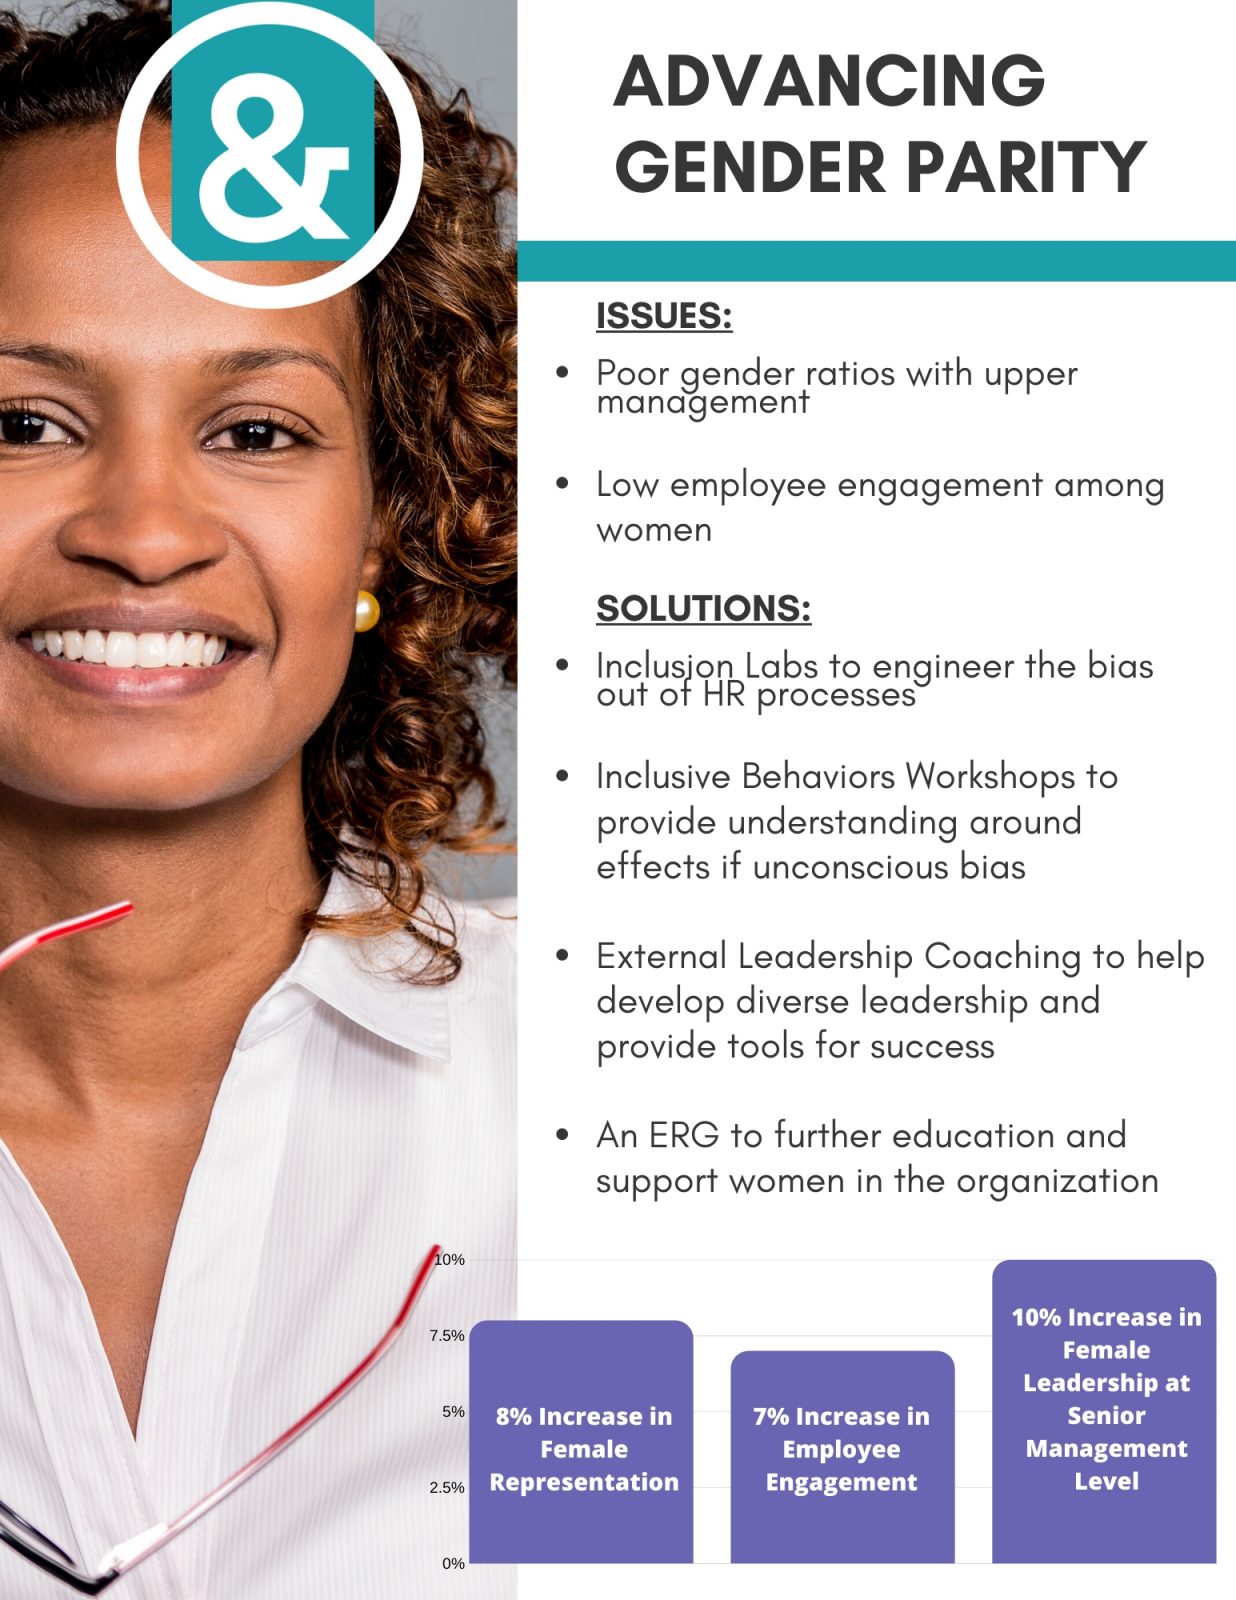 Leadership Gender Parity Case Study - Lead Inclusively